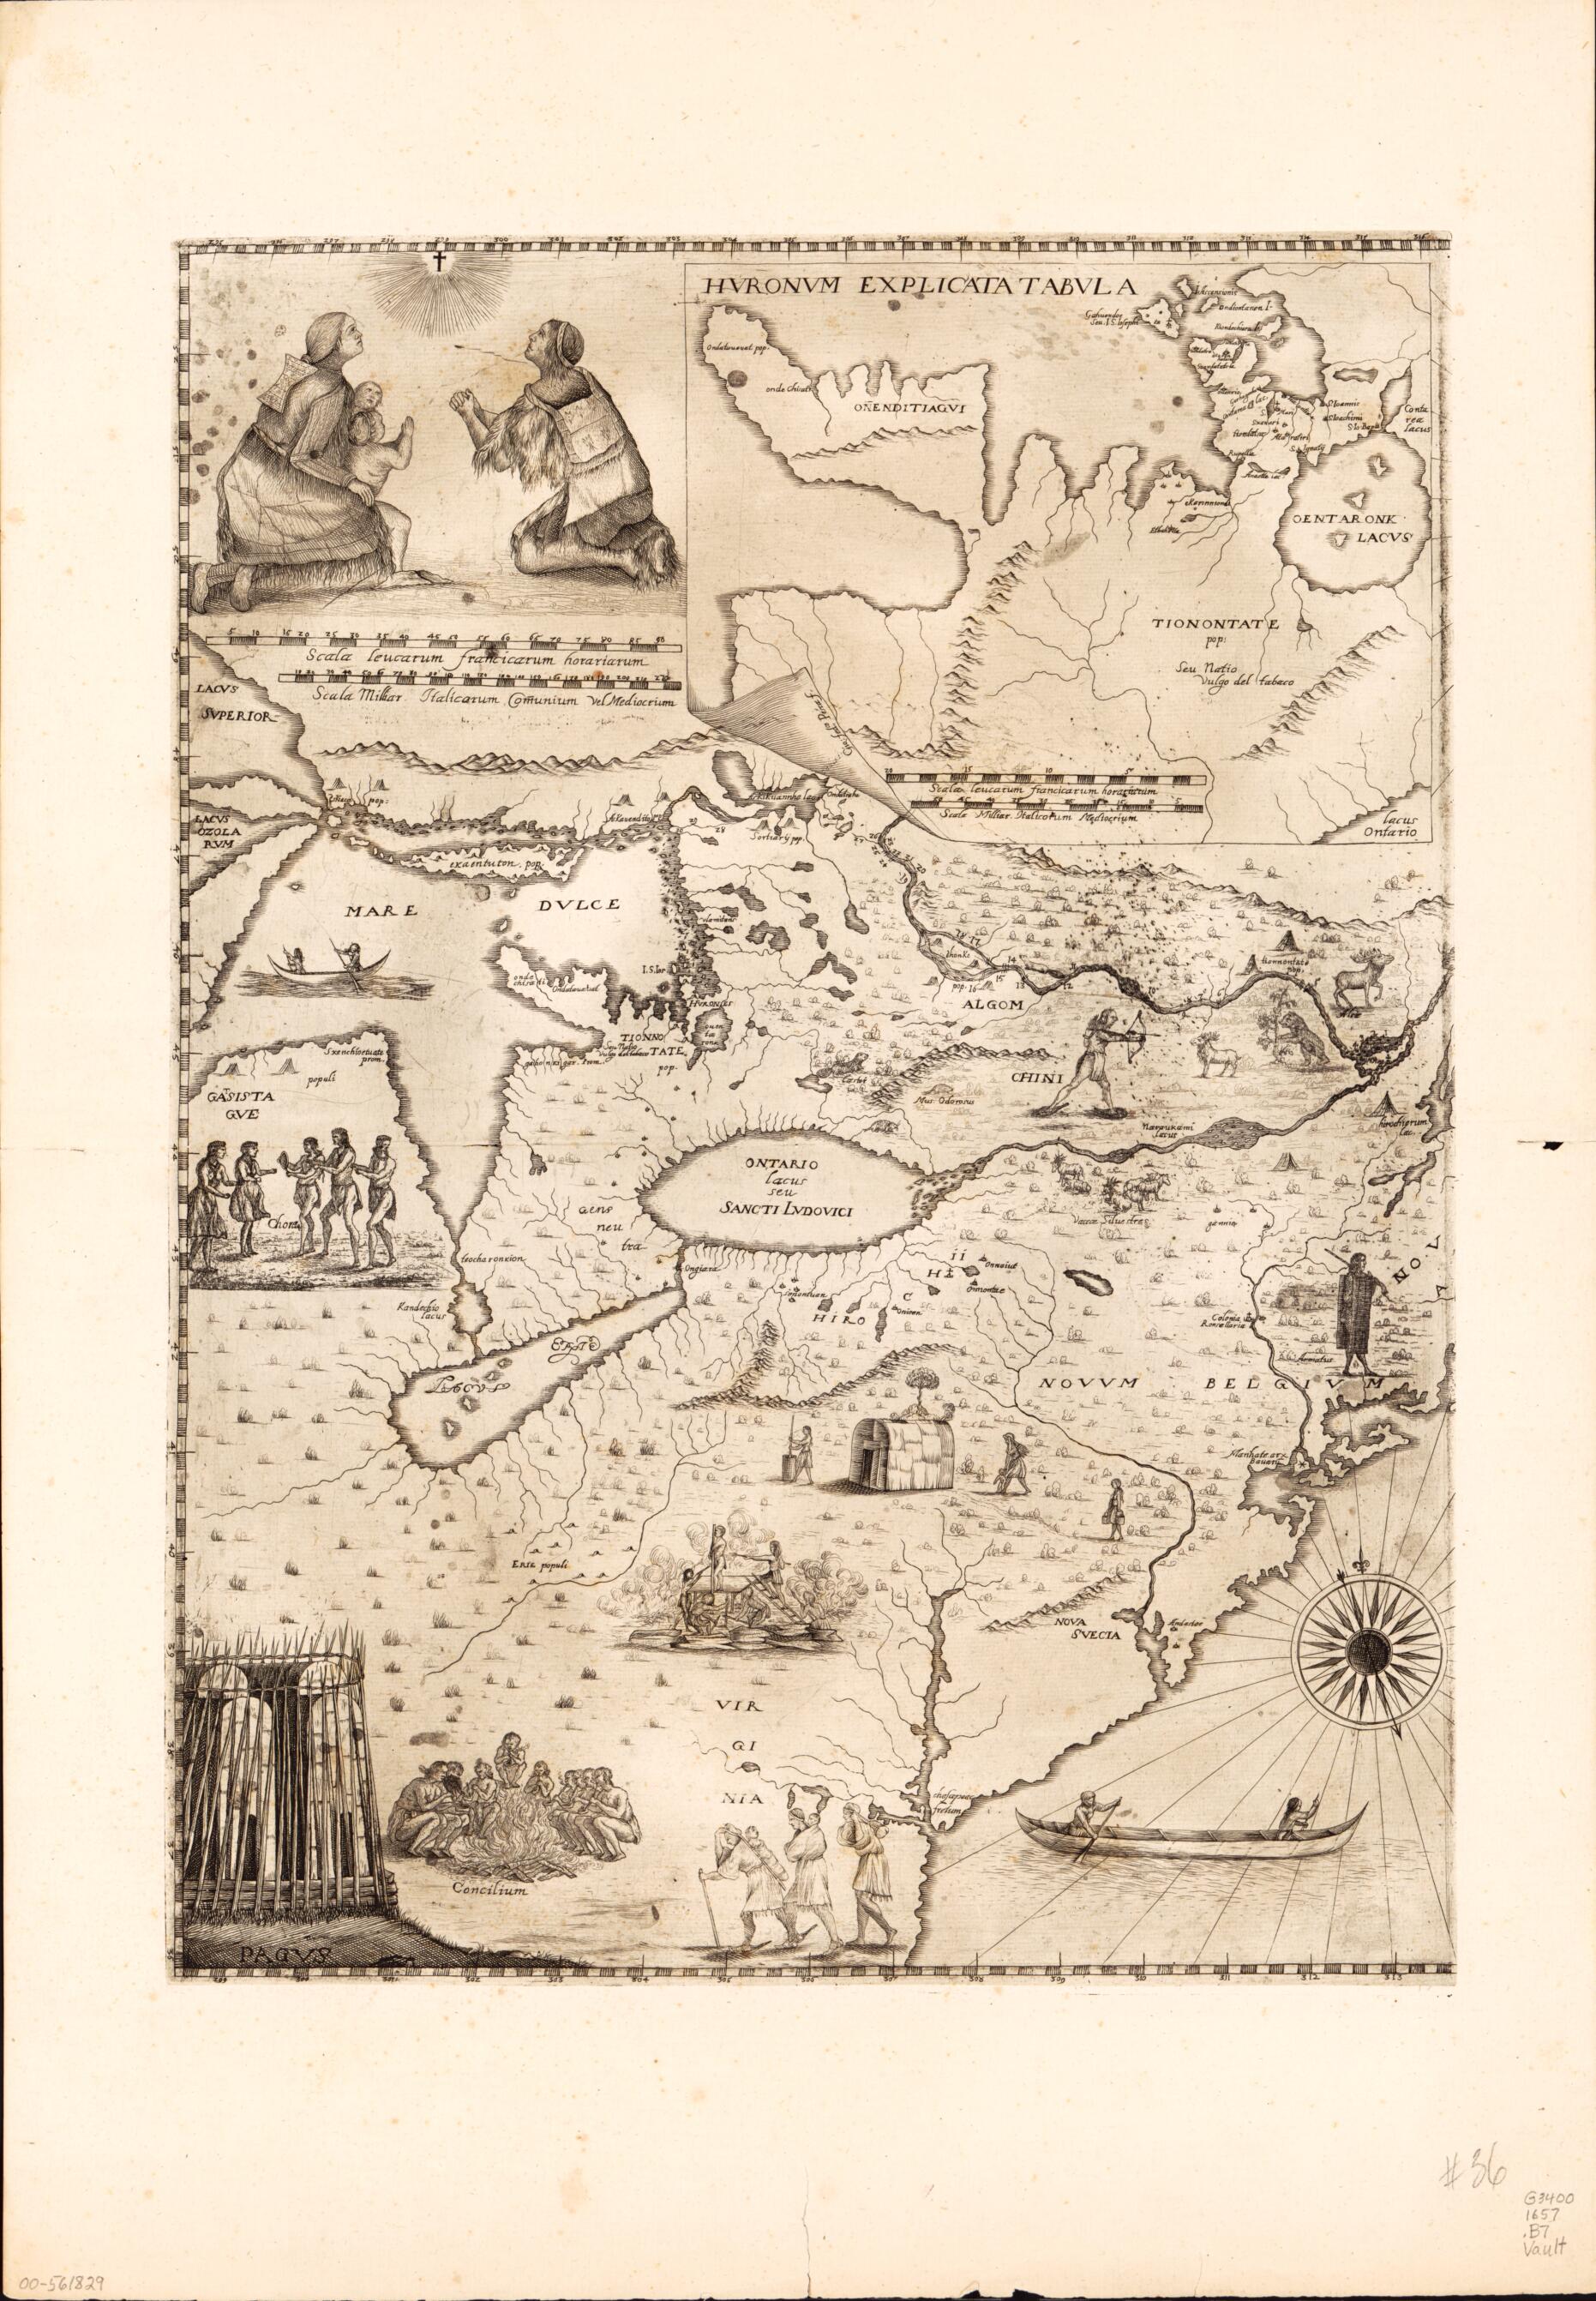 This old map of Novae Franciae Accurata Delineatio from 1657 was created by Francesco Giuseppe Bressani in 1657